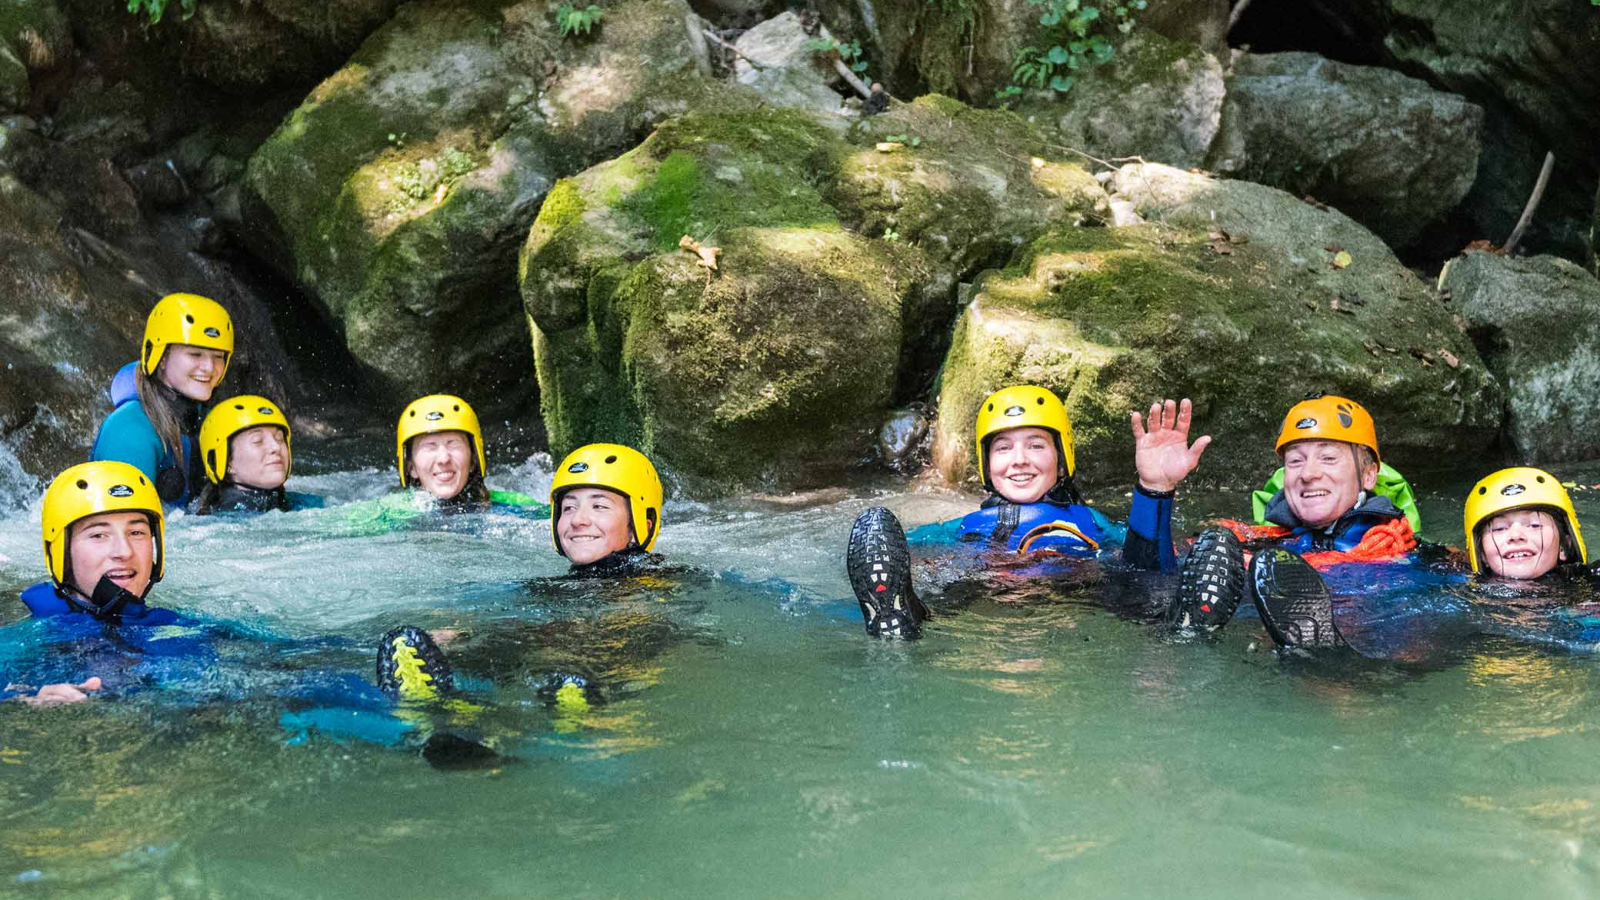 Canyoning discovery outing as a group